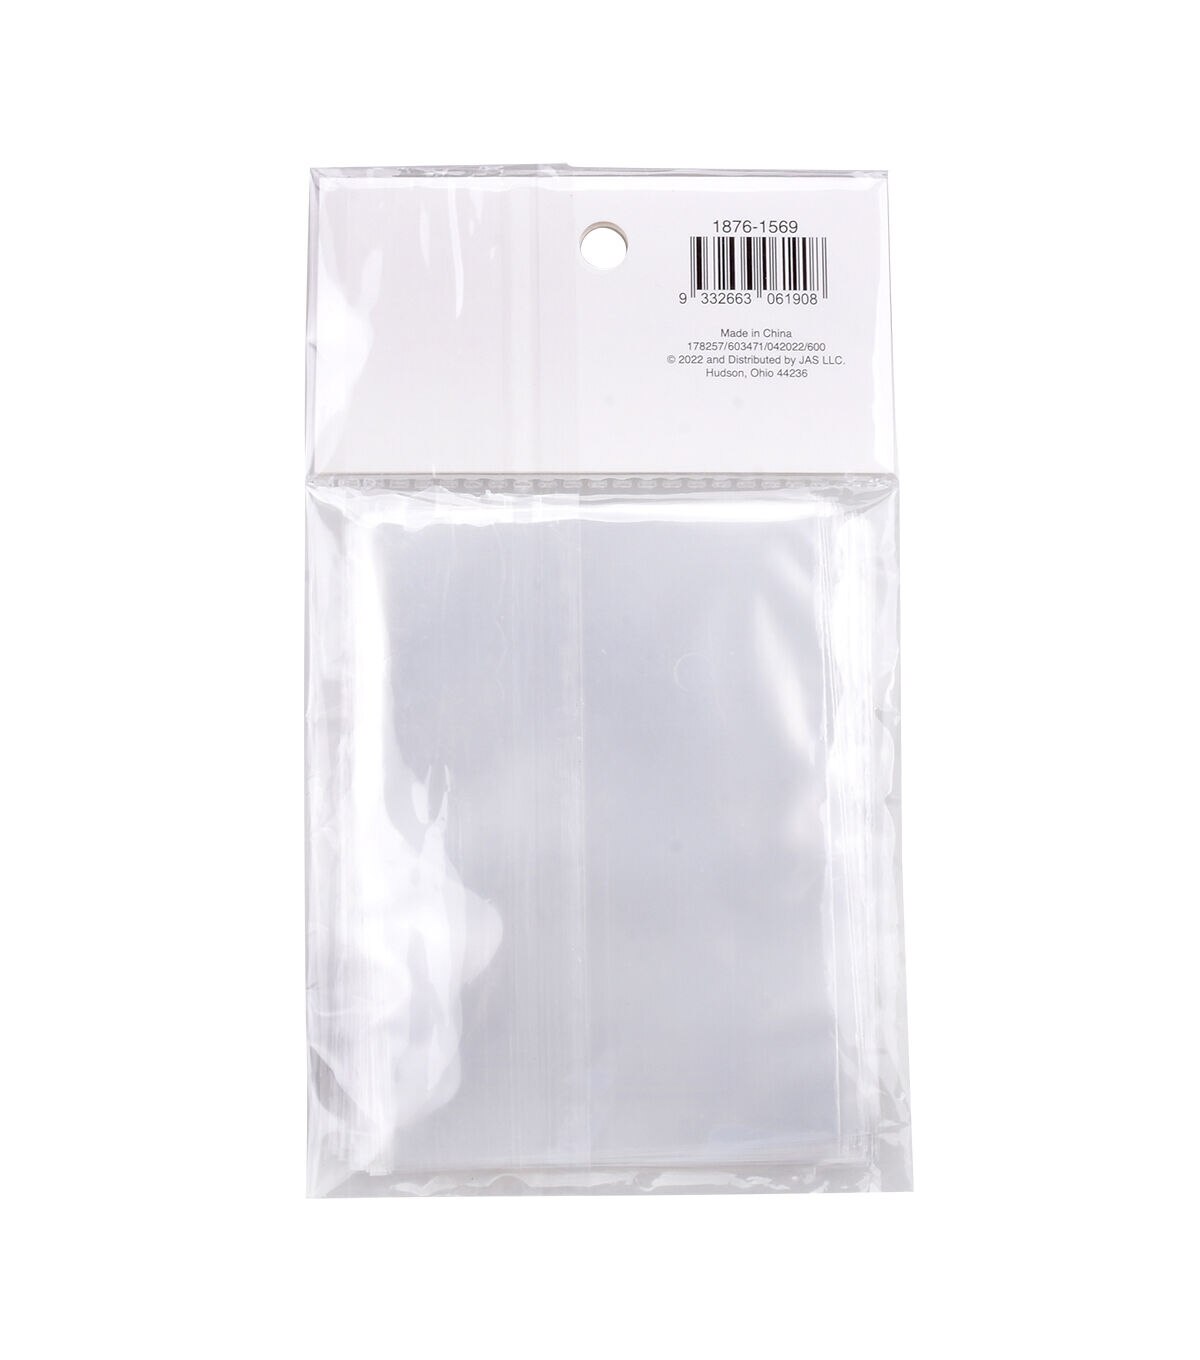 Lollipop Bags with Silver Ties Pk/25 (152 x 95mm / 6 x 3.75”)